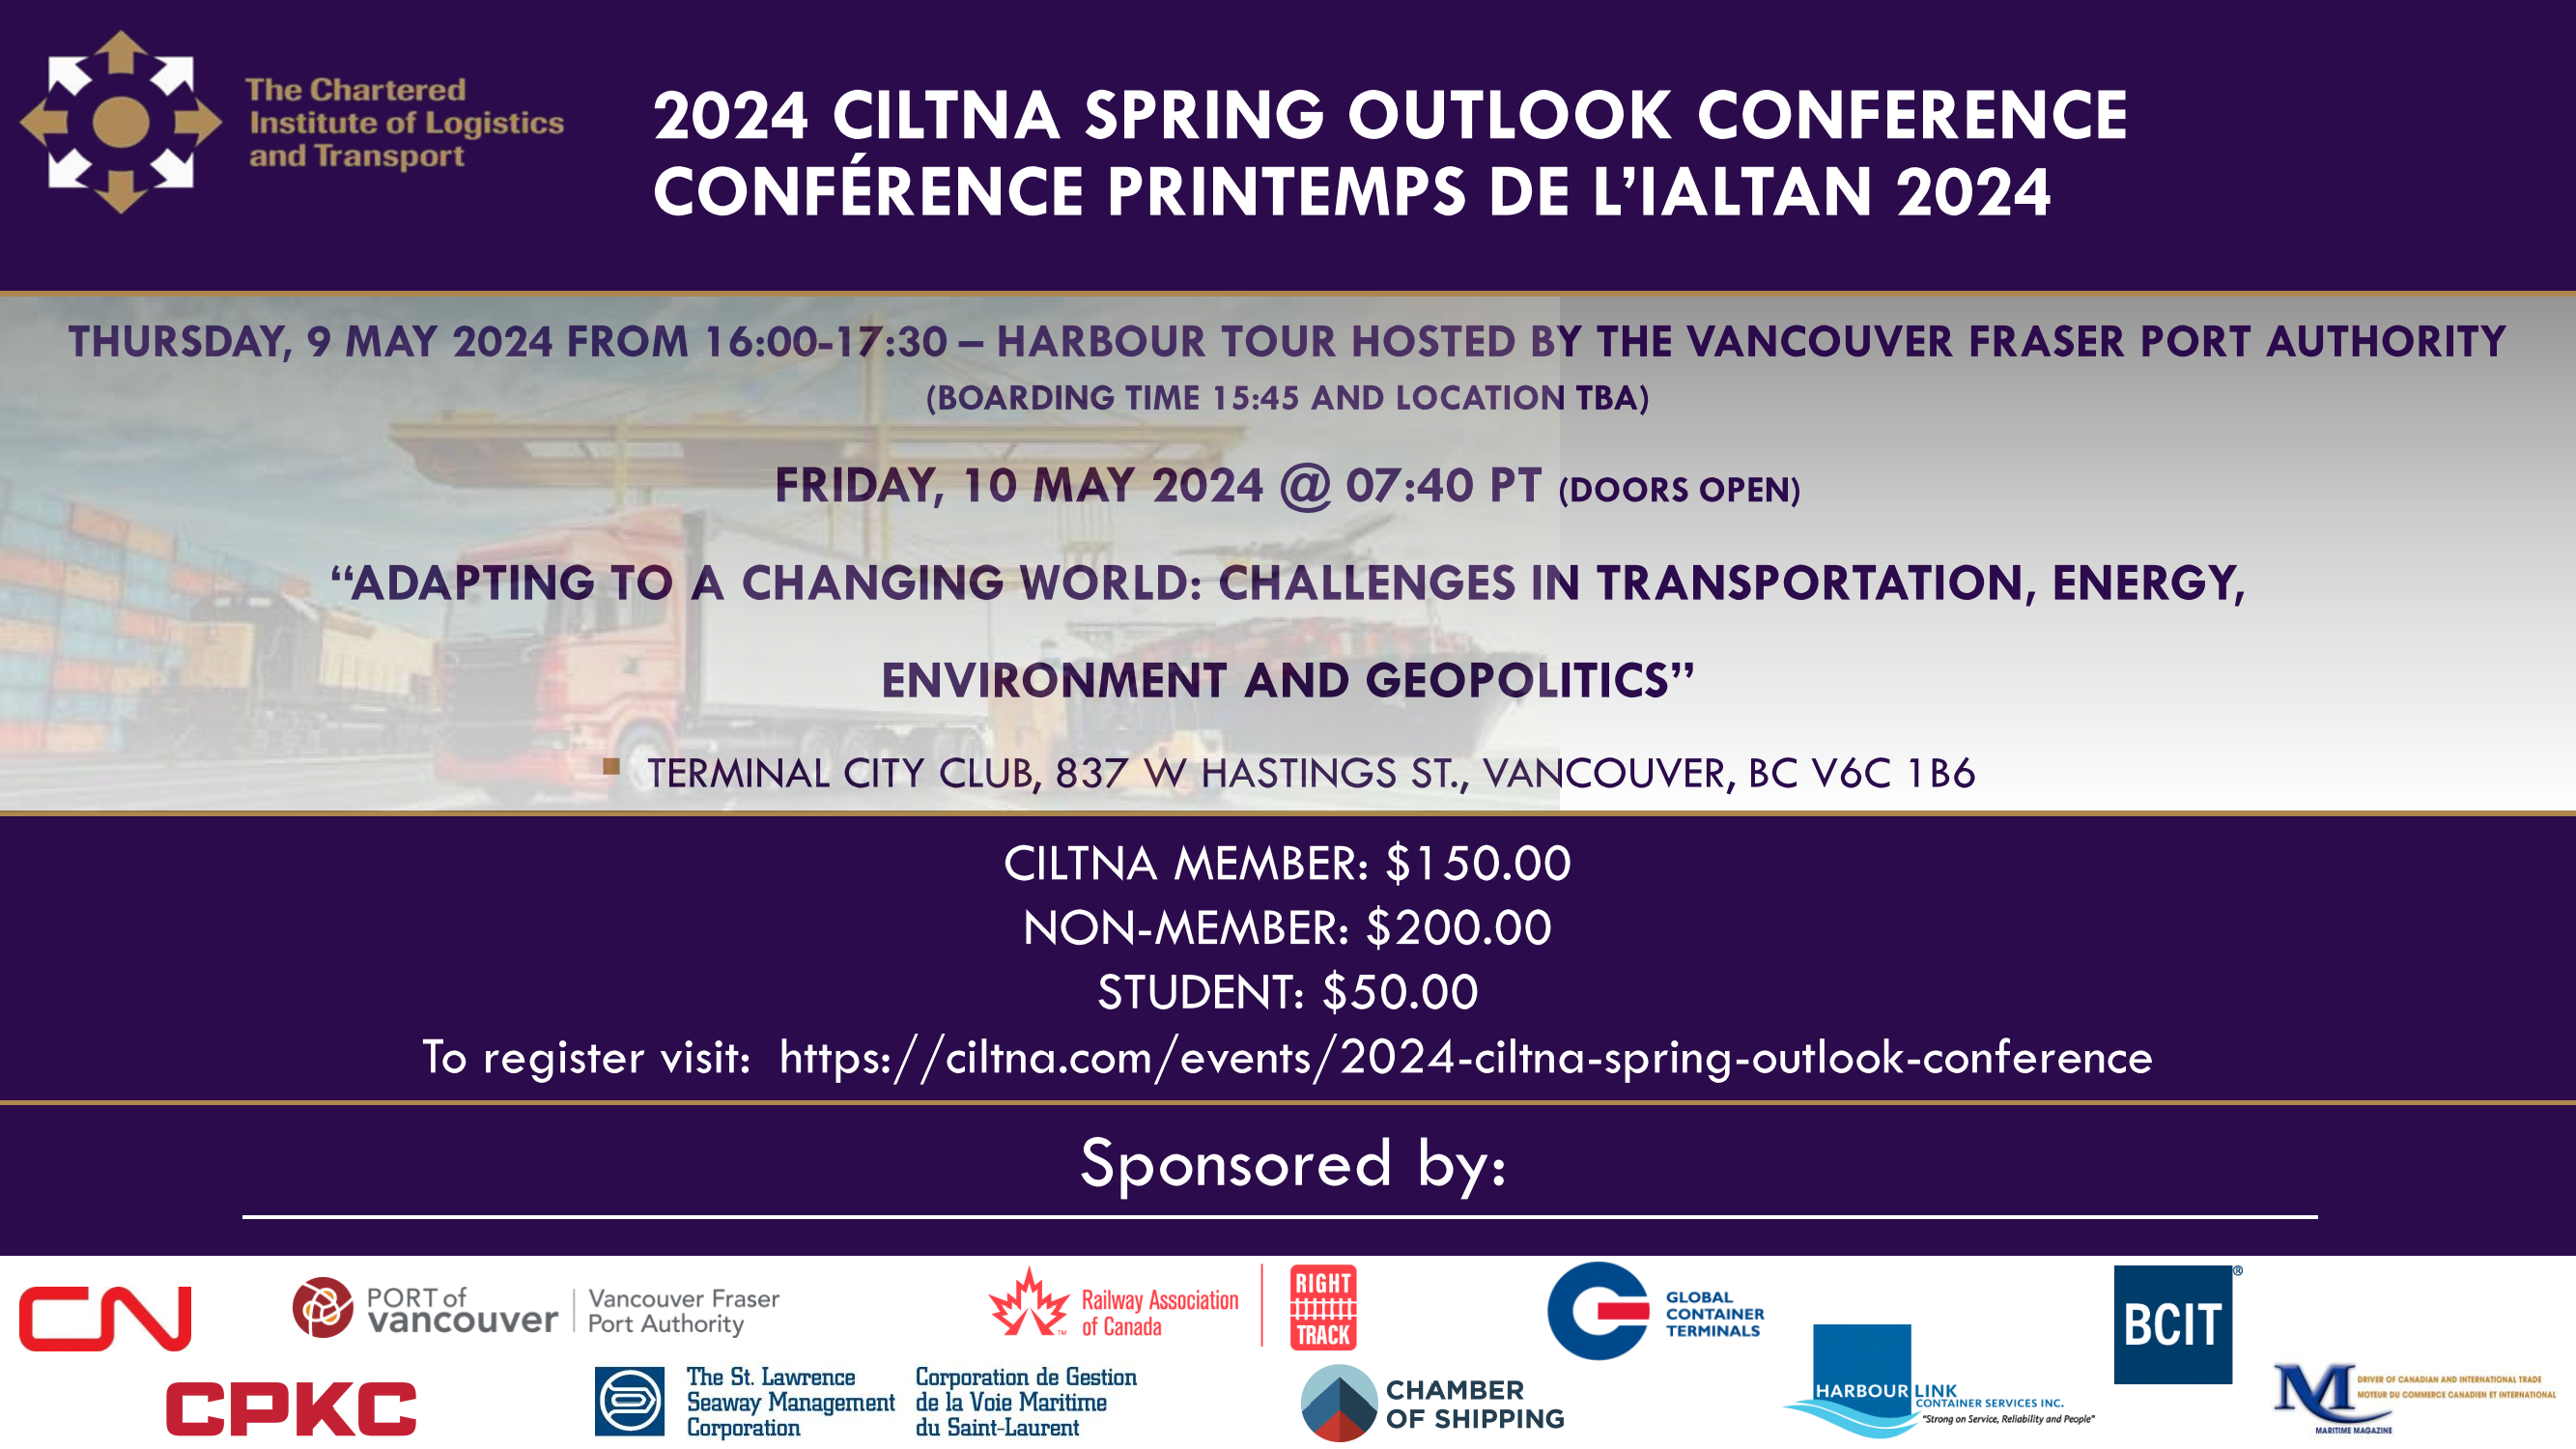 9-10 May 2024 - 2024 CILTNA Annual Spring Outlook Conference:  “Adapting to a Changing World: Challenges in Transportation, Energy,  Environment and Geopolitics”